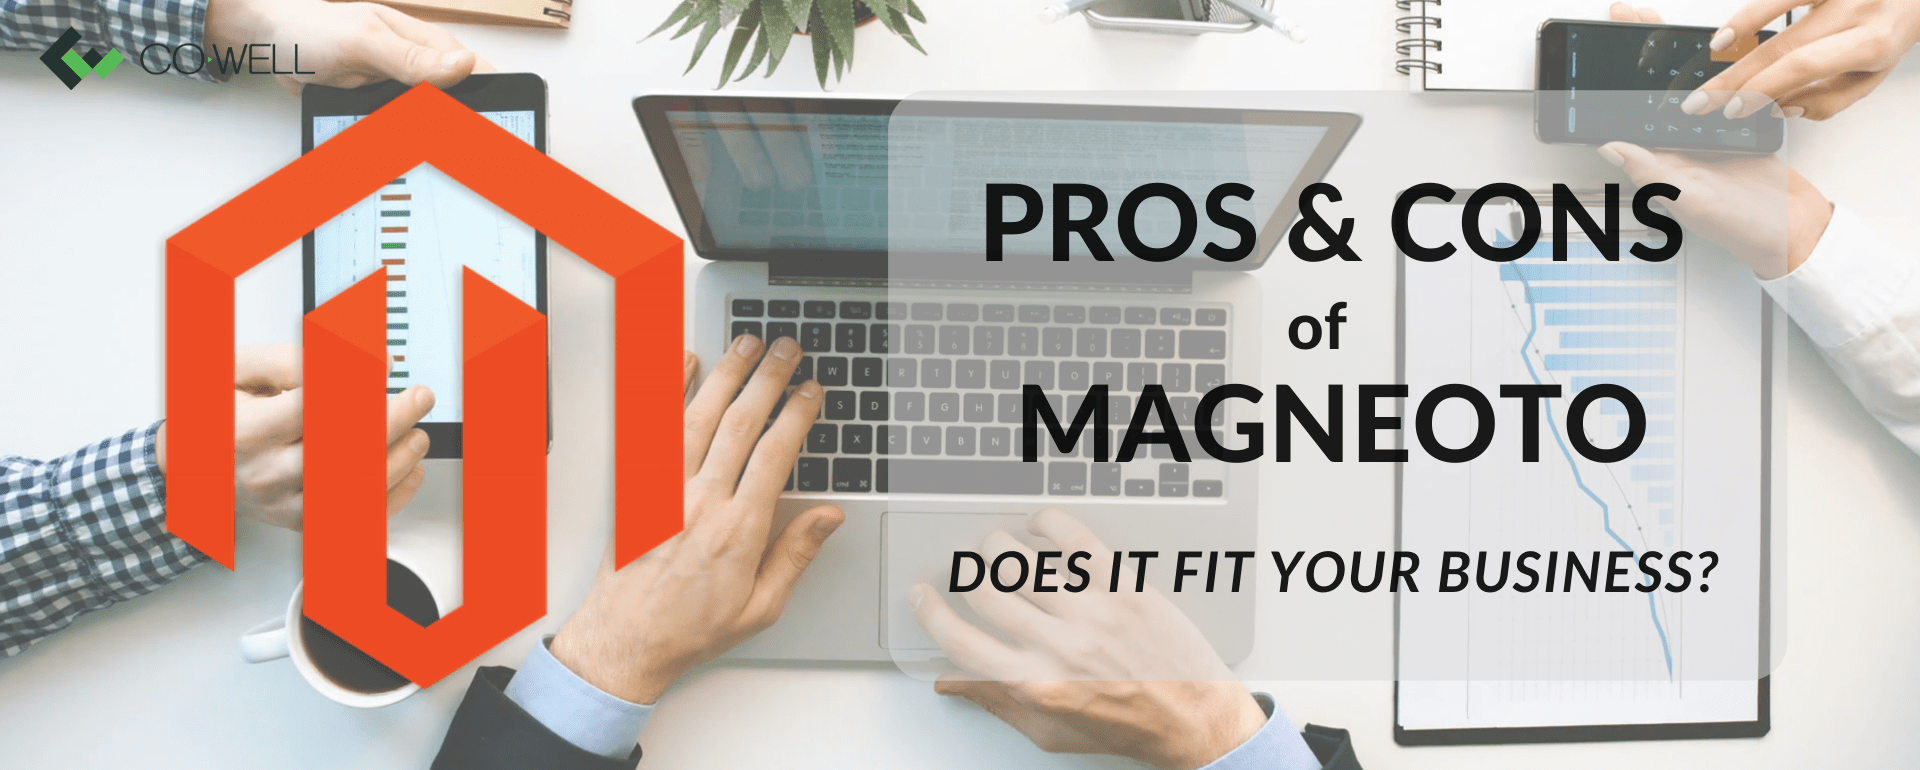 PROS-CONS-of-MAGNEOTO